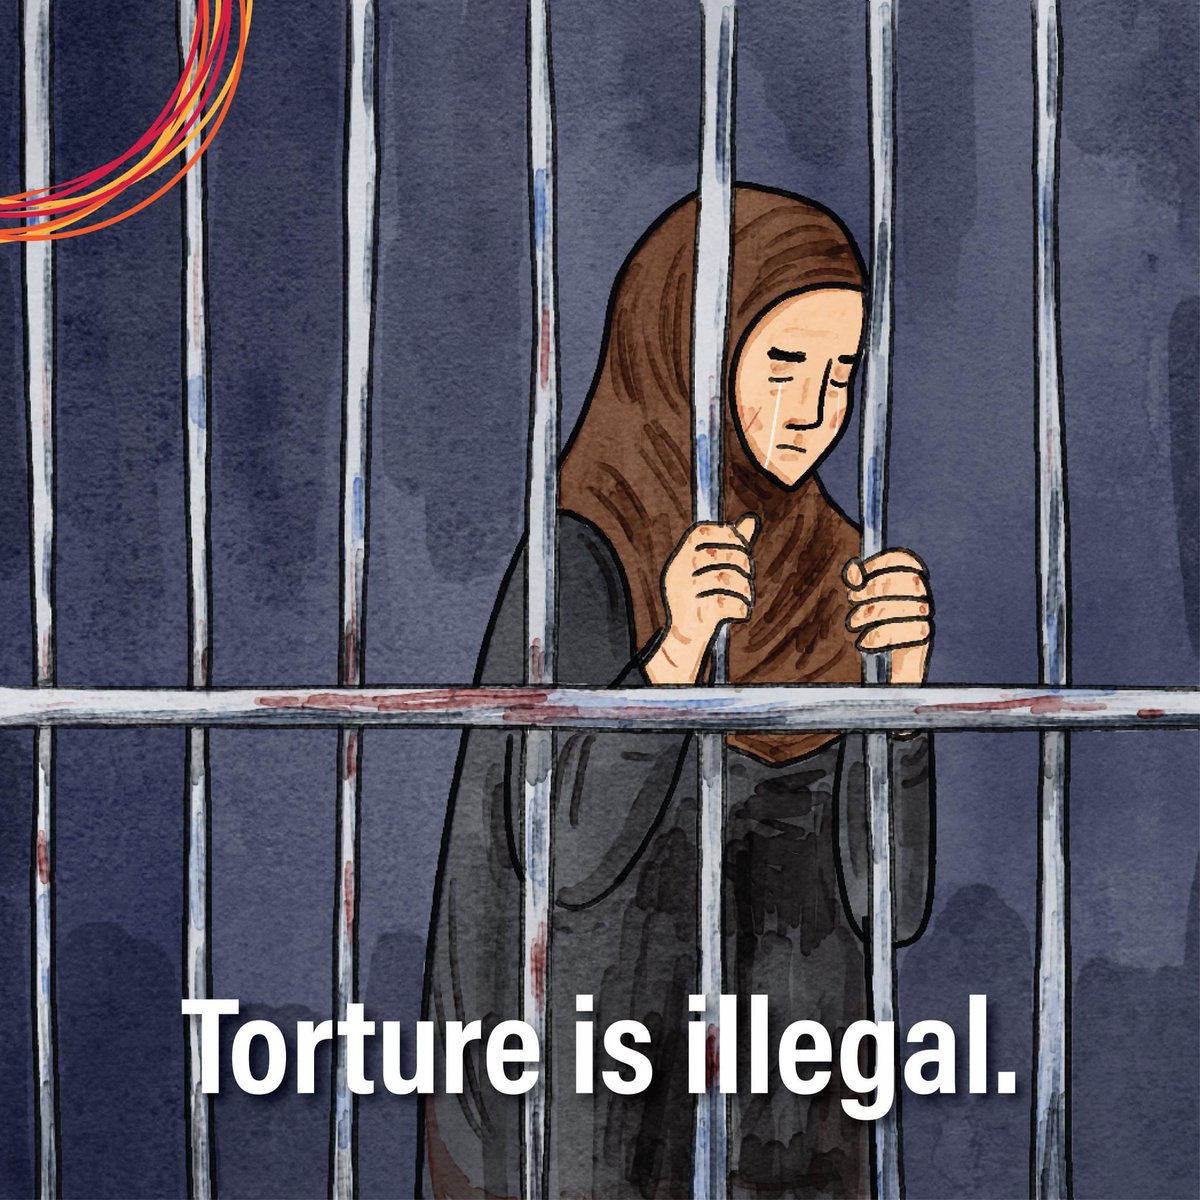 It’s a fact: Torture is a crime, without exception. Torture is explicitly banned by the UN Convention against Torture and Other Cruel, Inhuman or Degrading Treatment or Punishment, and under U.S. law. It’s not allowed in a time of war, national emergency or in the name of